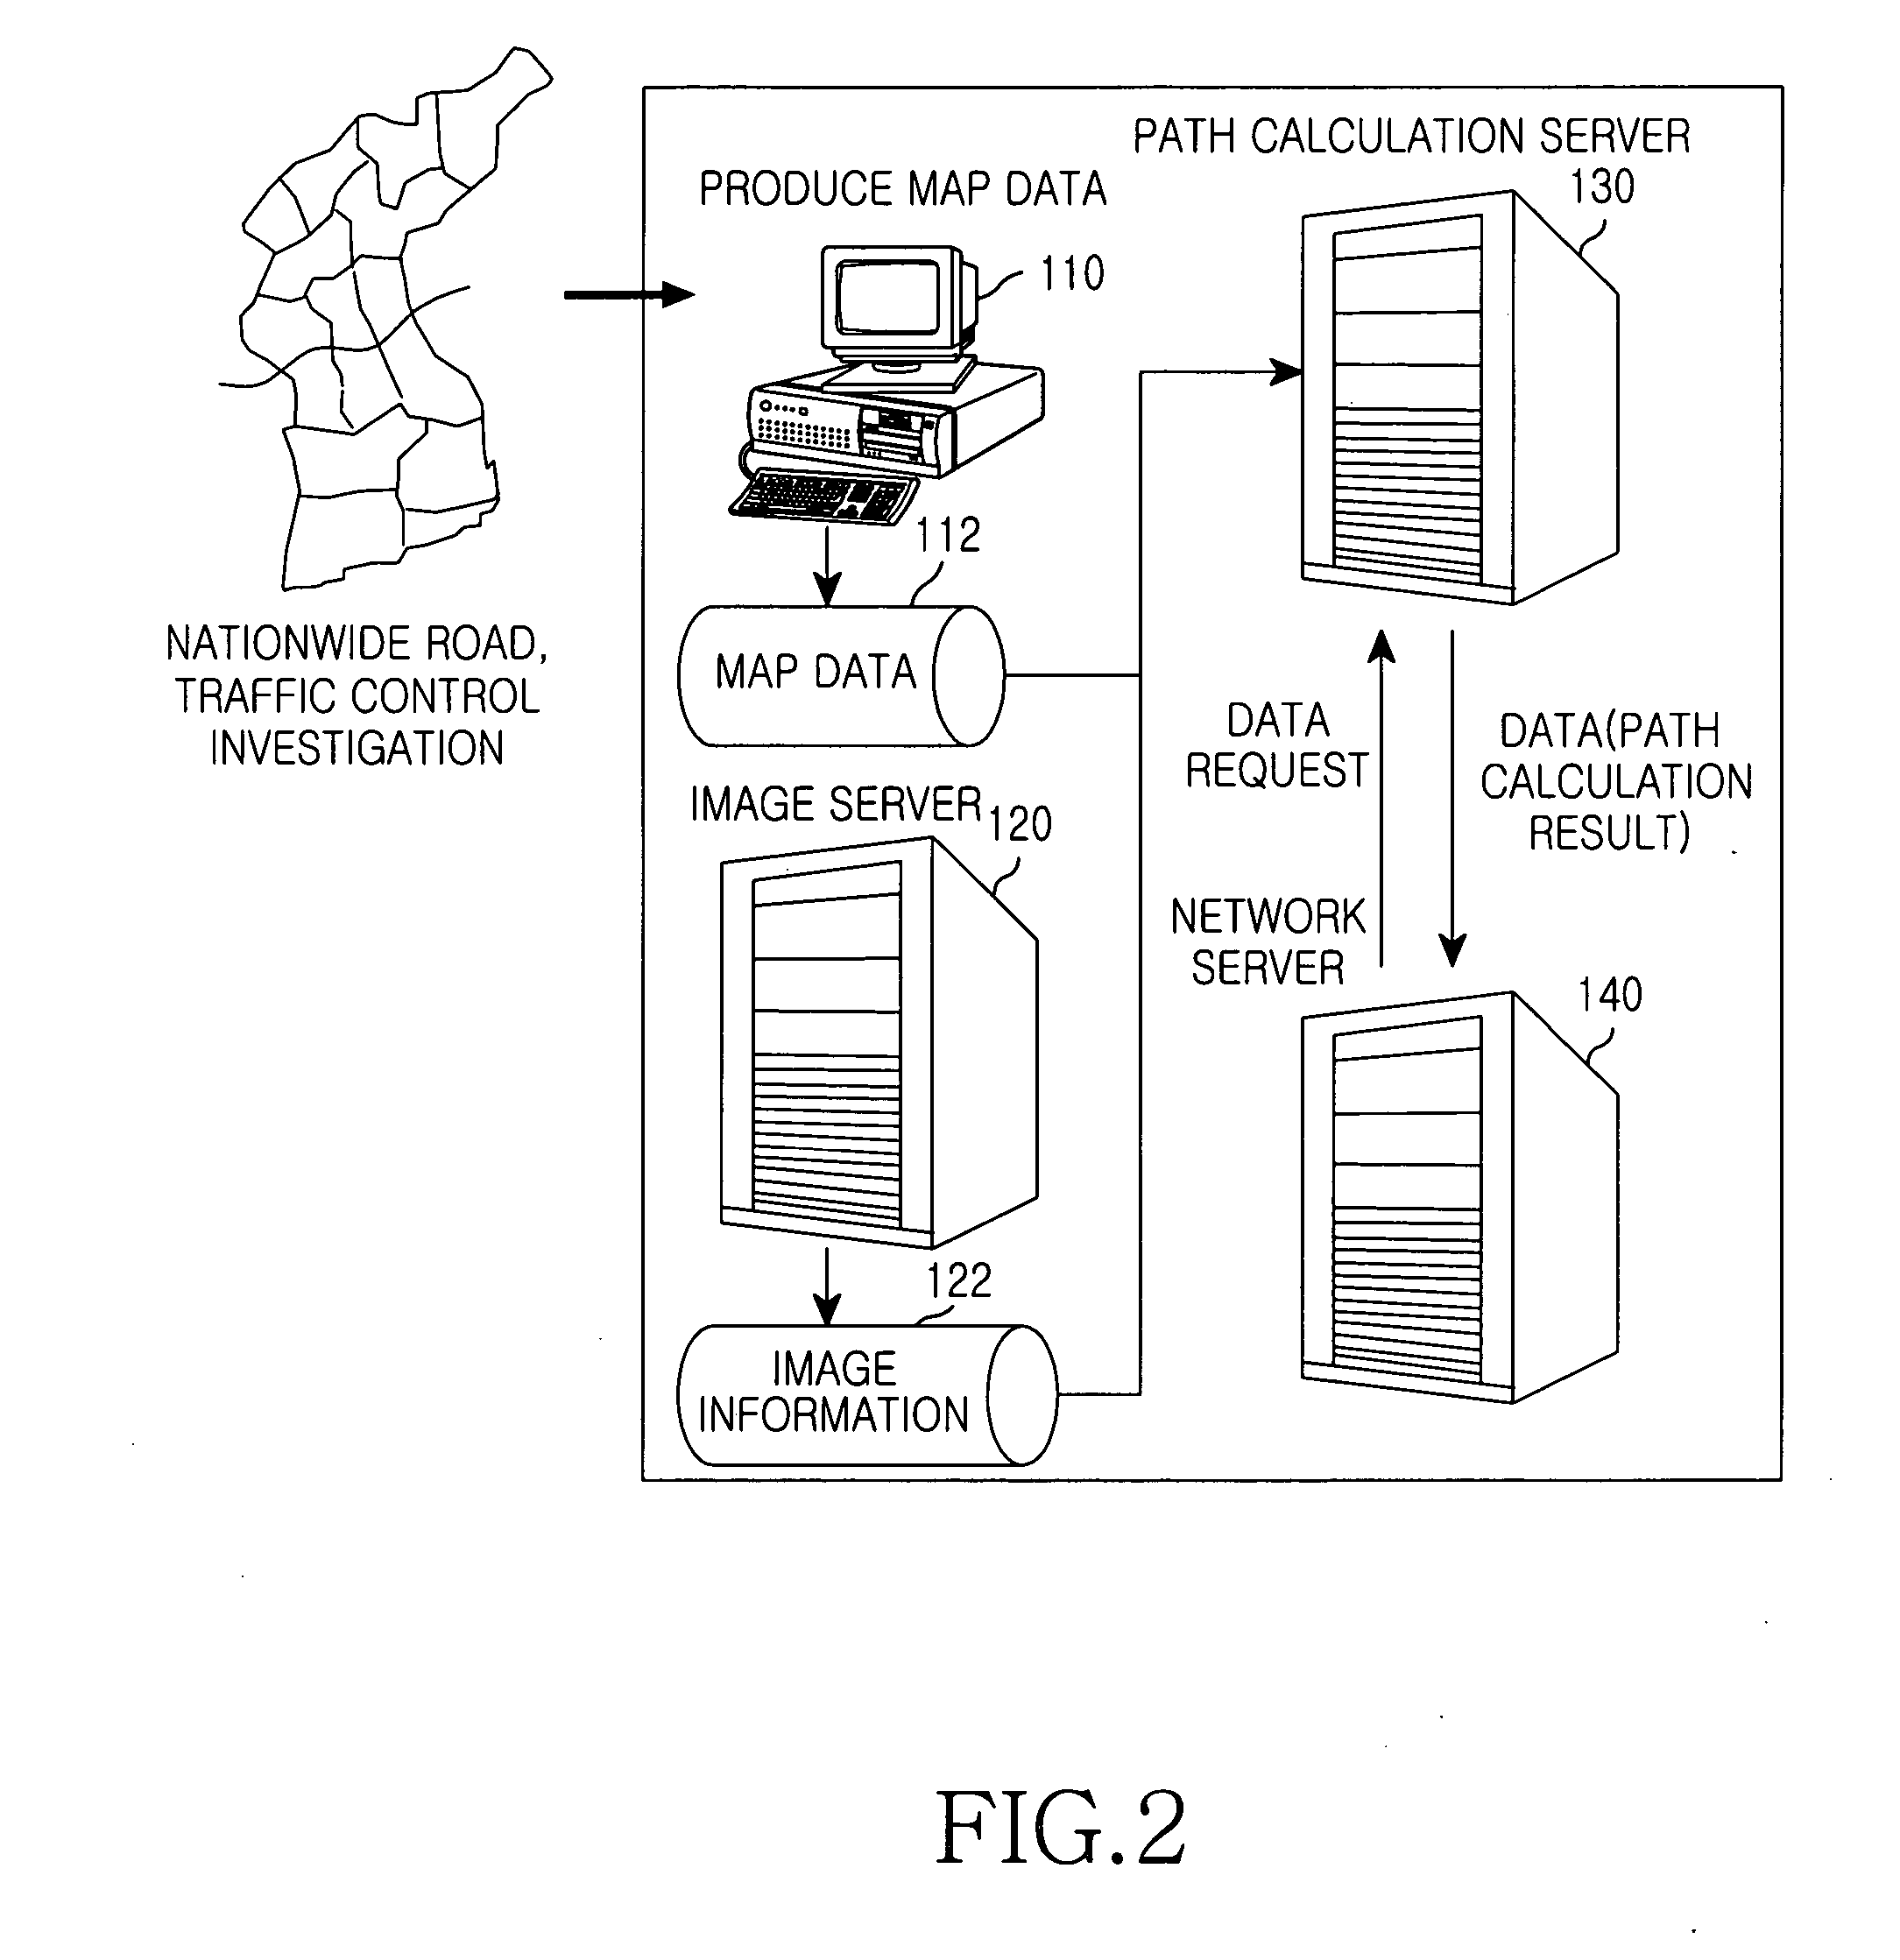 Apparatus and method for downloading and displaying images relating to global positioning information in a navigation system